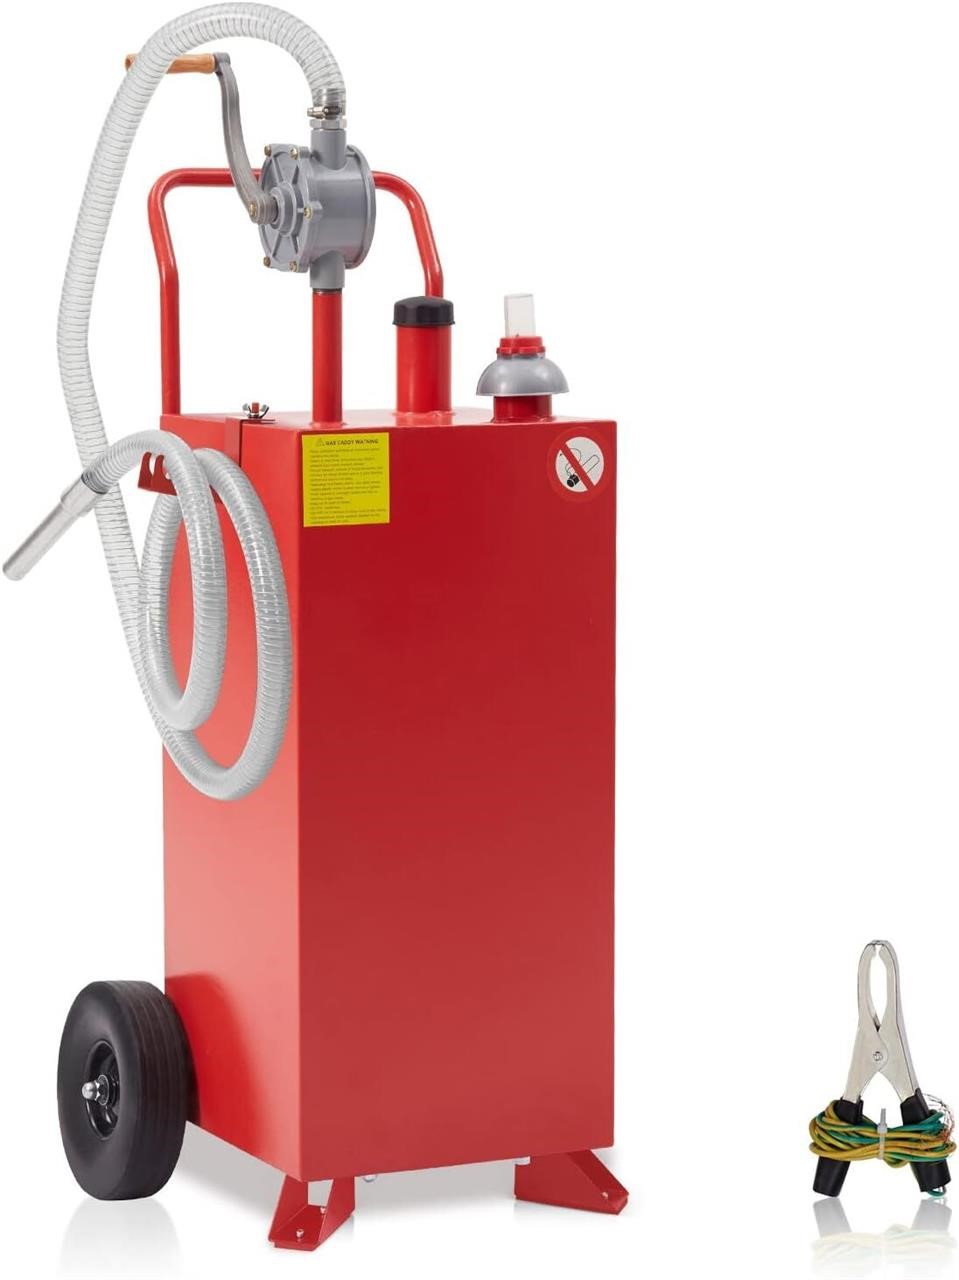 30 Gallon Gas Caddy with Manual Transfer Pump  Fue